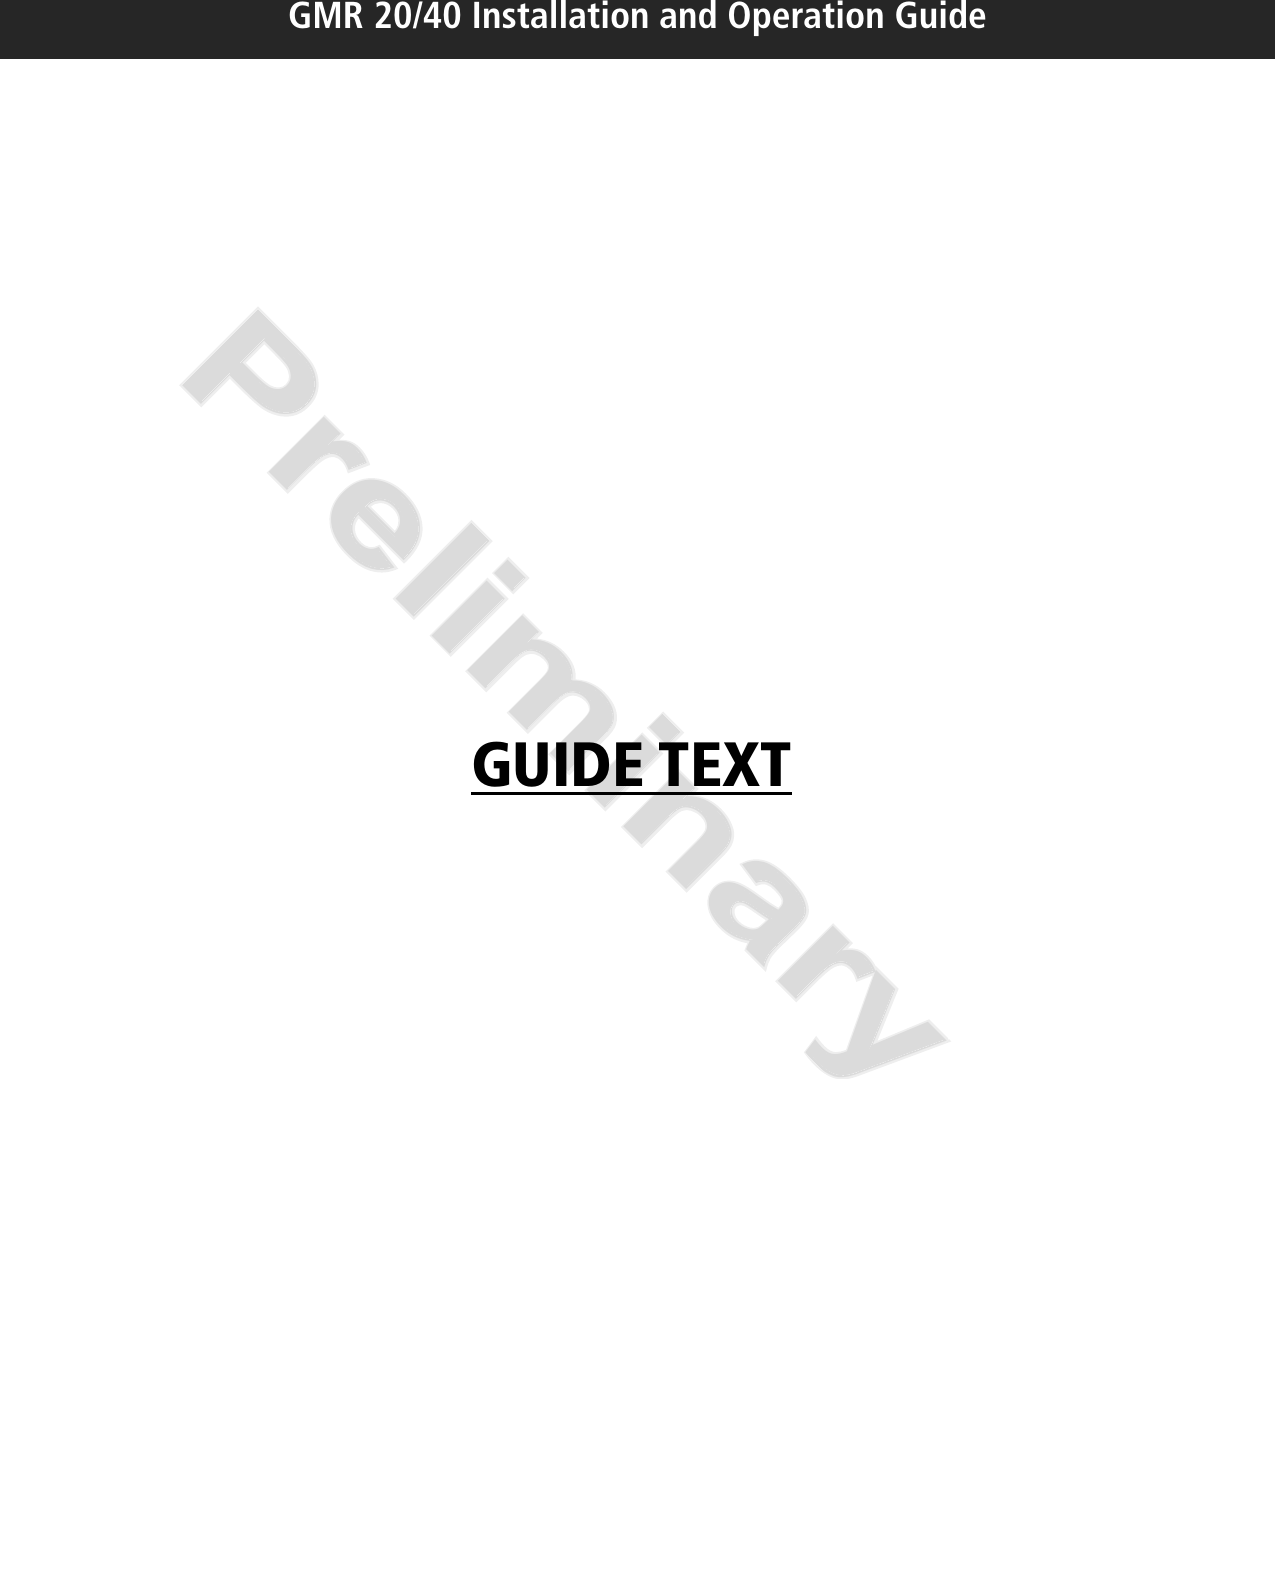 GMR 20/40 Installation and Operation GuidePreliminaryPreliminaryGUIDE TEXT